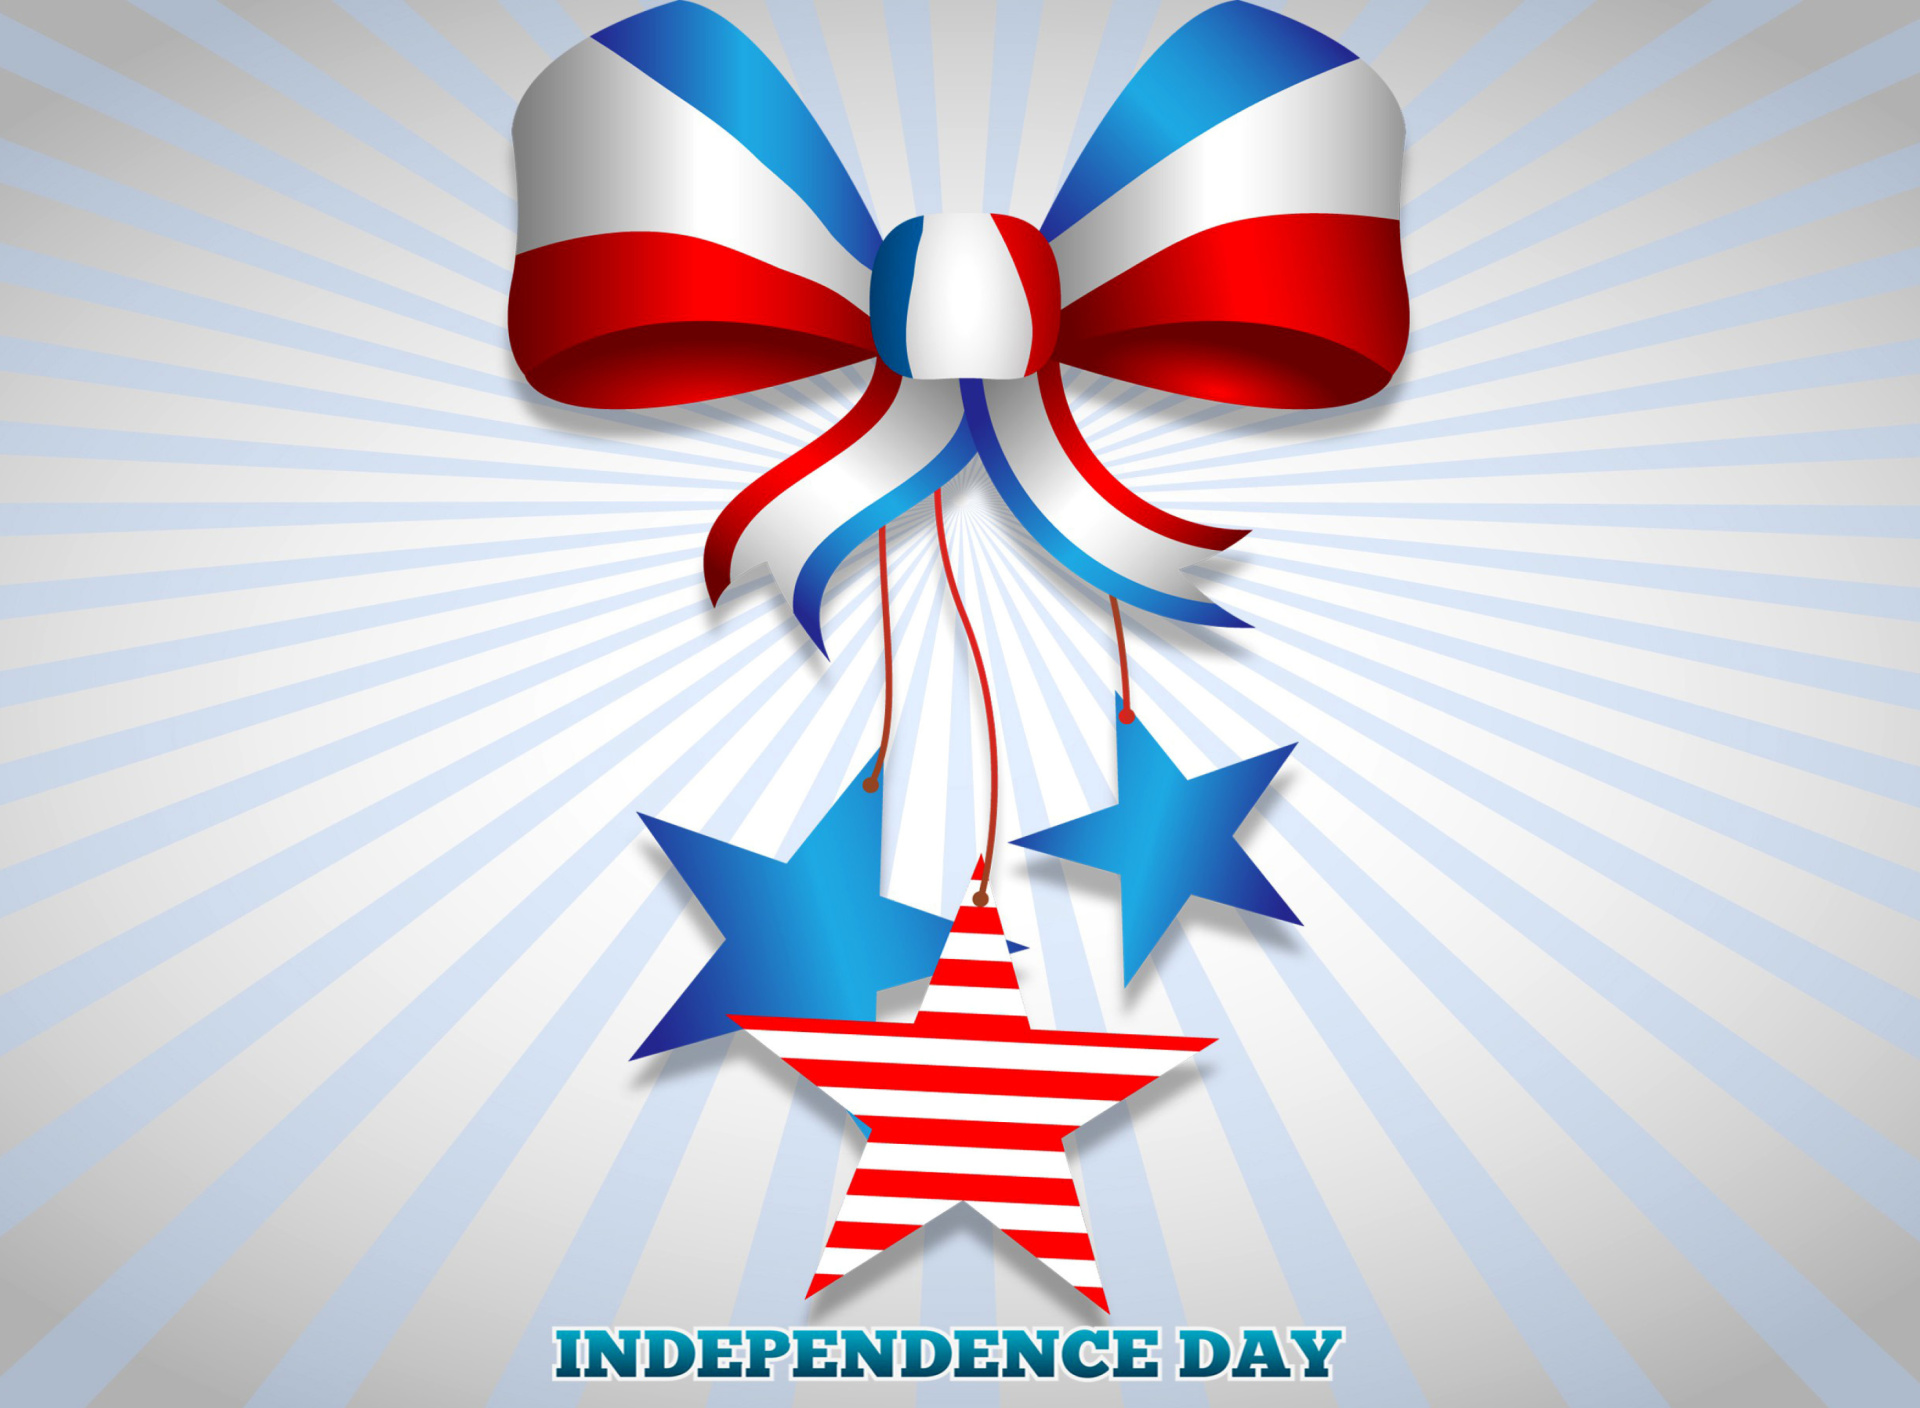 United states america Idependence day 4th july wallpaper 1920x1408